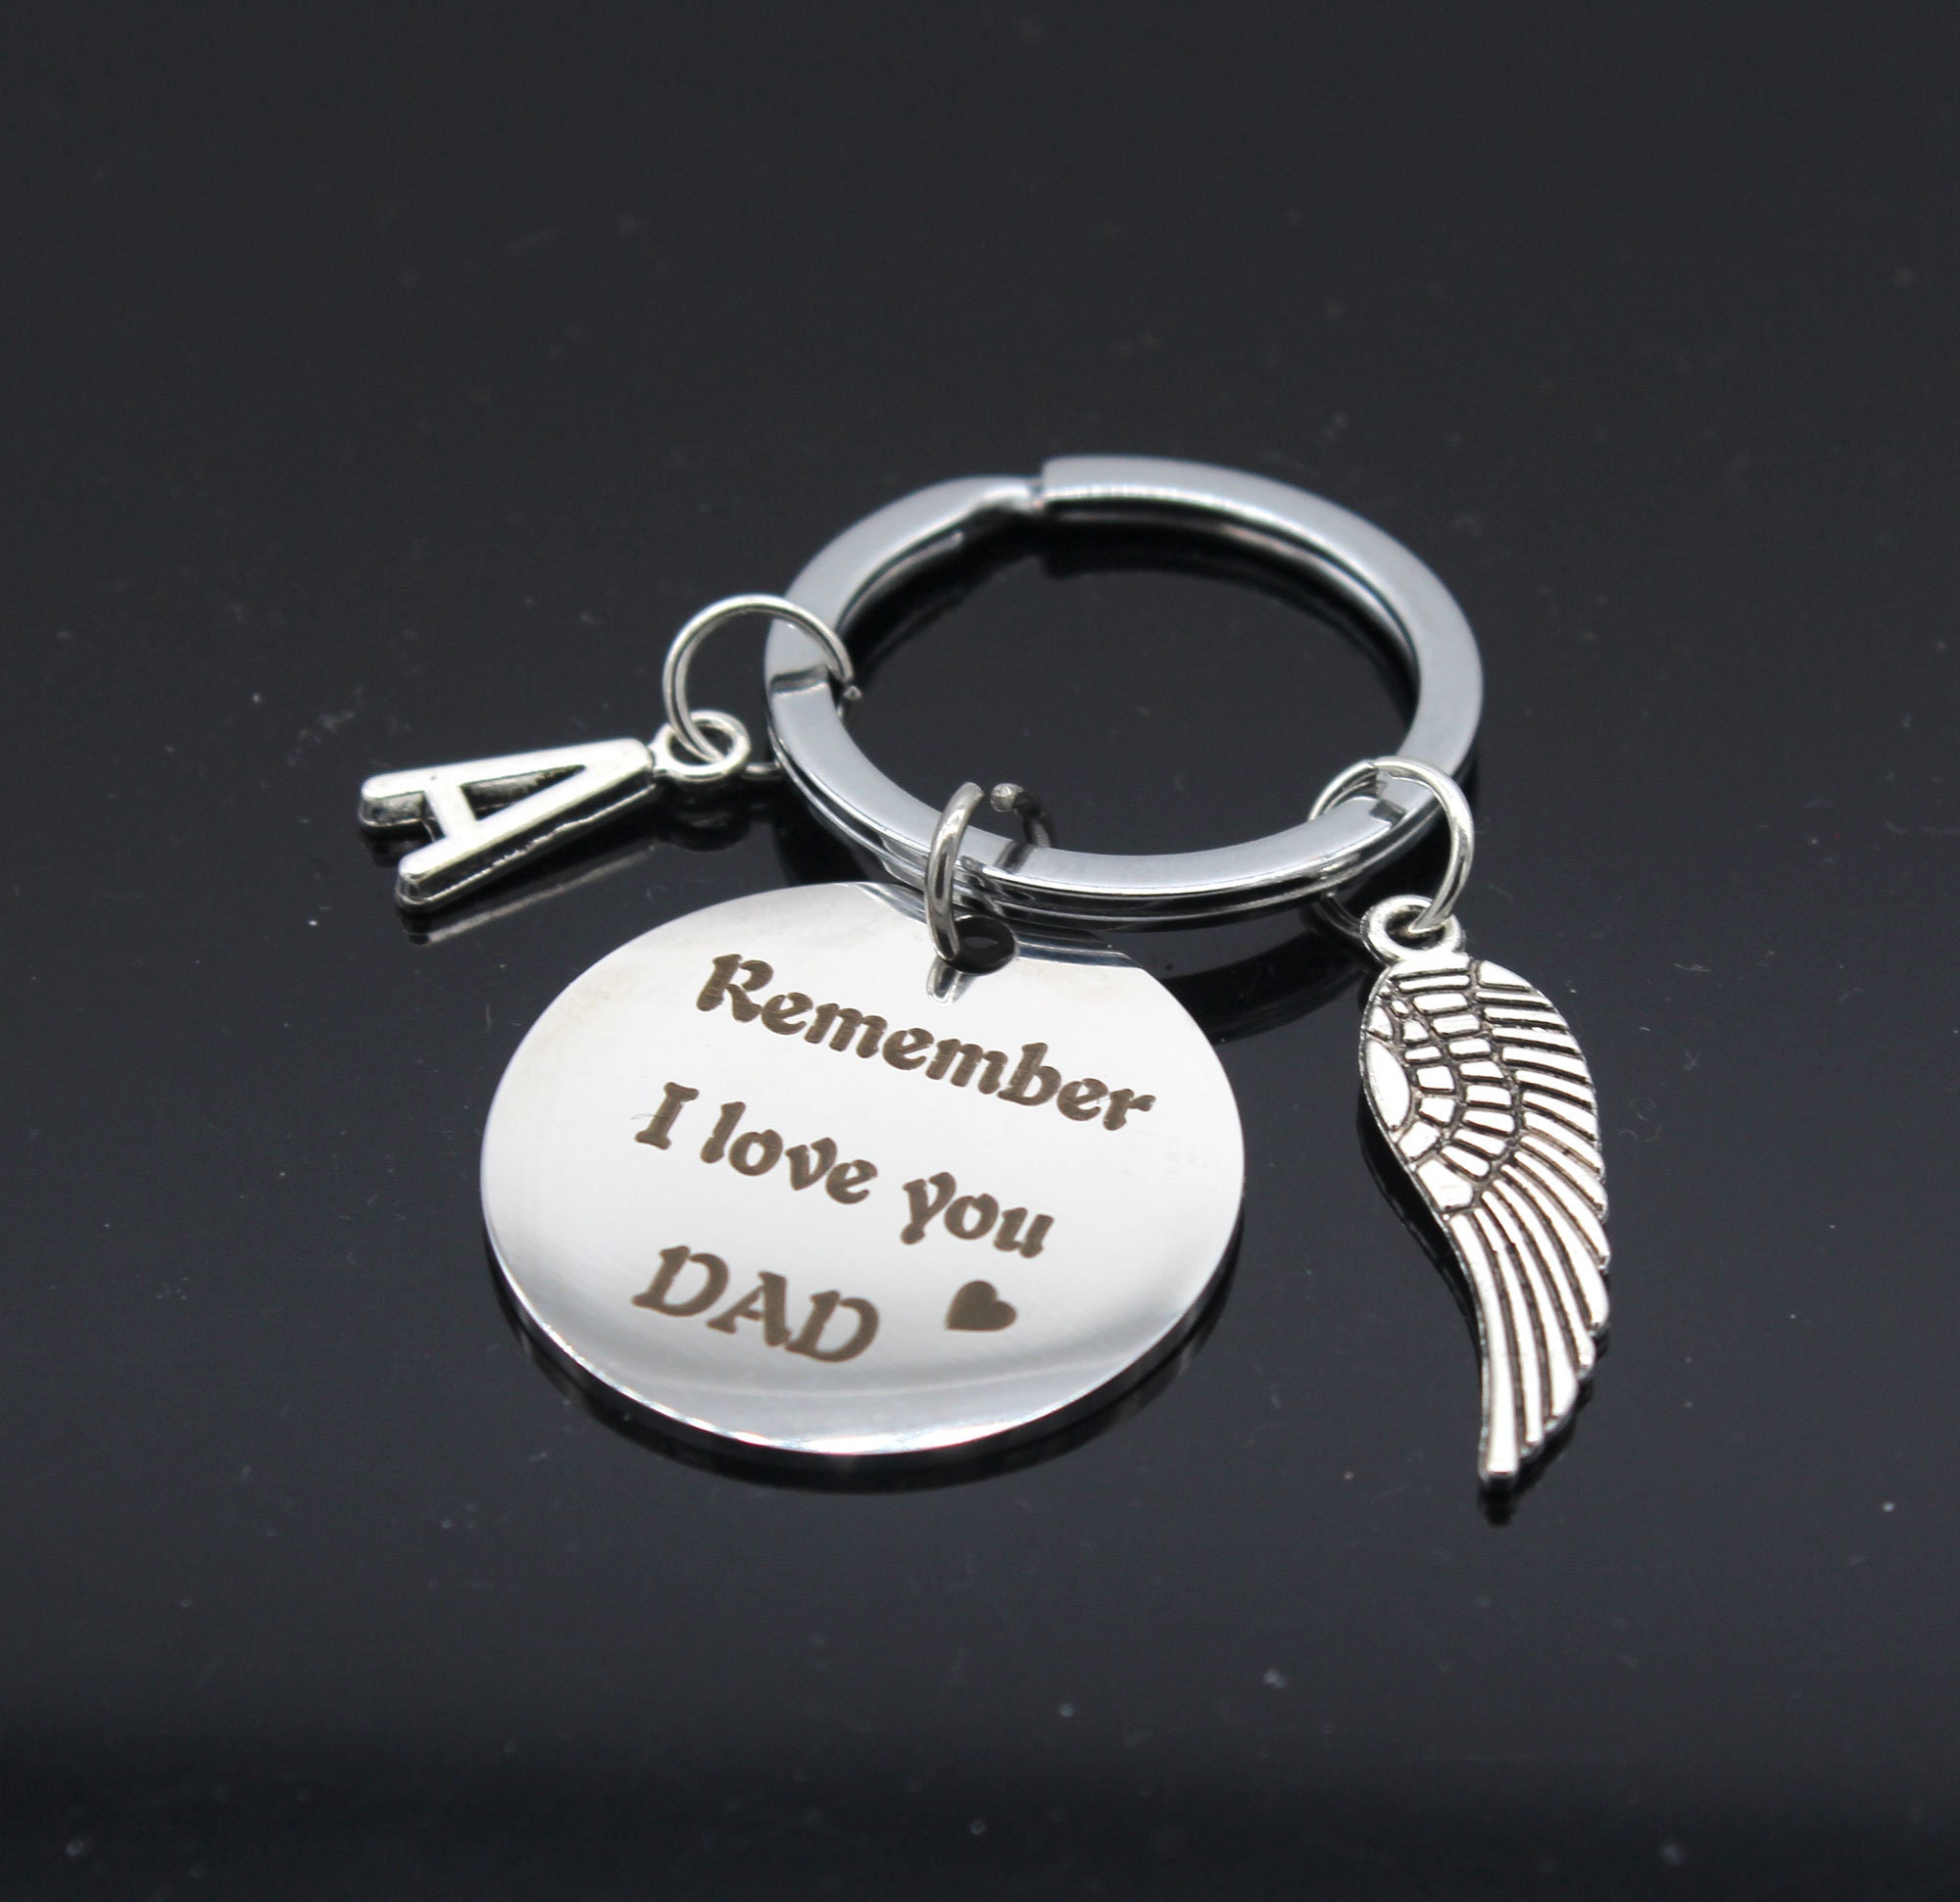 High Quality Stainless Steel Intial KeychainRemember I Love You Dad.father's Day Gift, Gift For Dad, Custom Keychain, Personalized Gift.angle